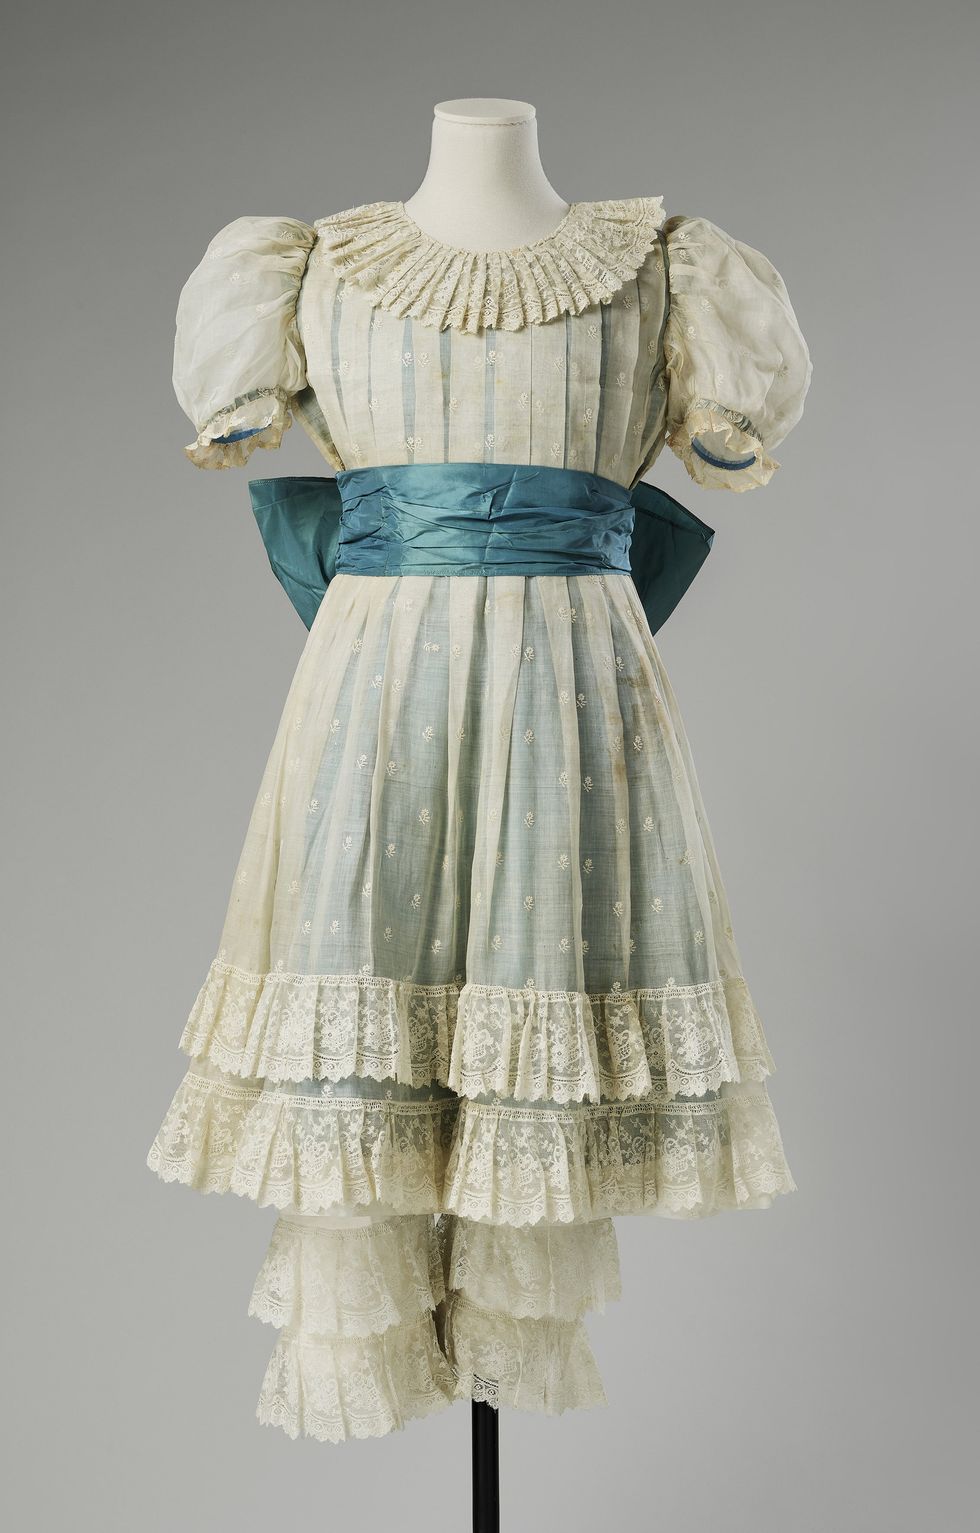 The blue taffeta dress overlaid with cream lace and matching cream lace bloomers worn by Princess Margaret to play The Hon. Lucinda Fairfax (Royal Collection/PA)